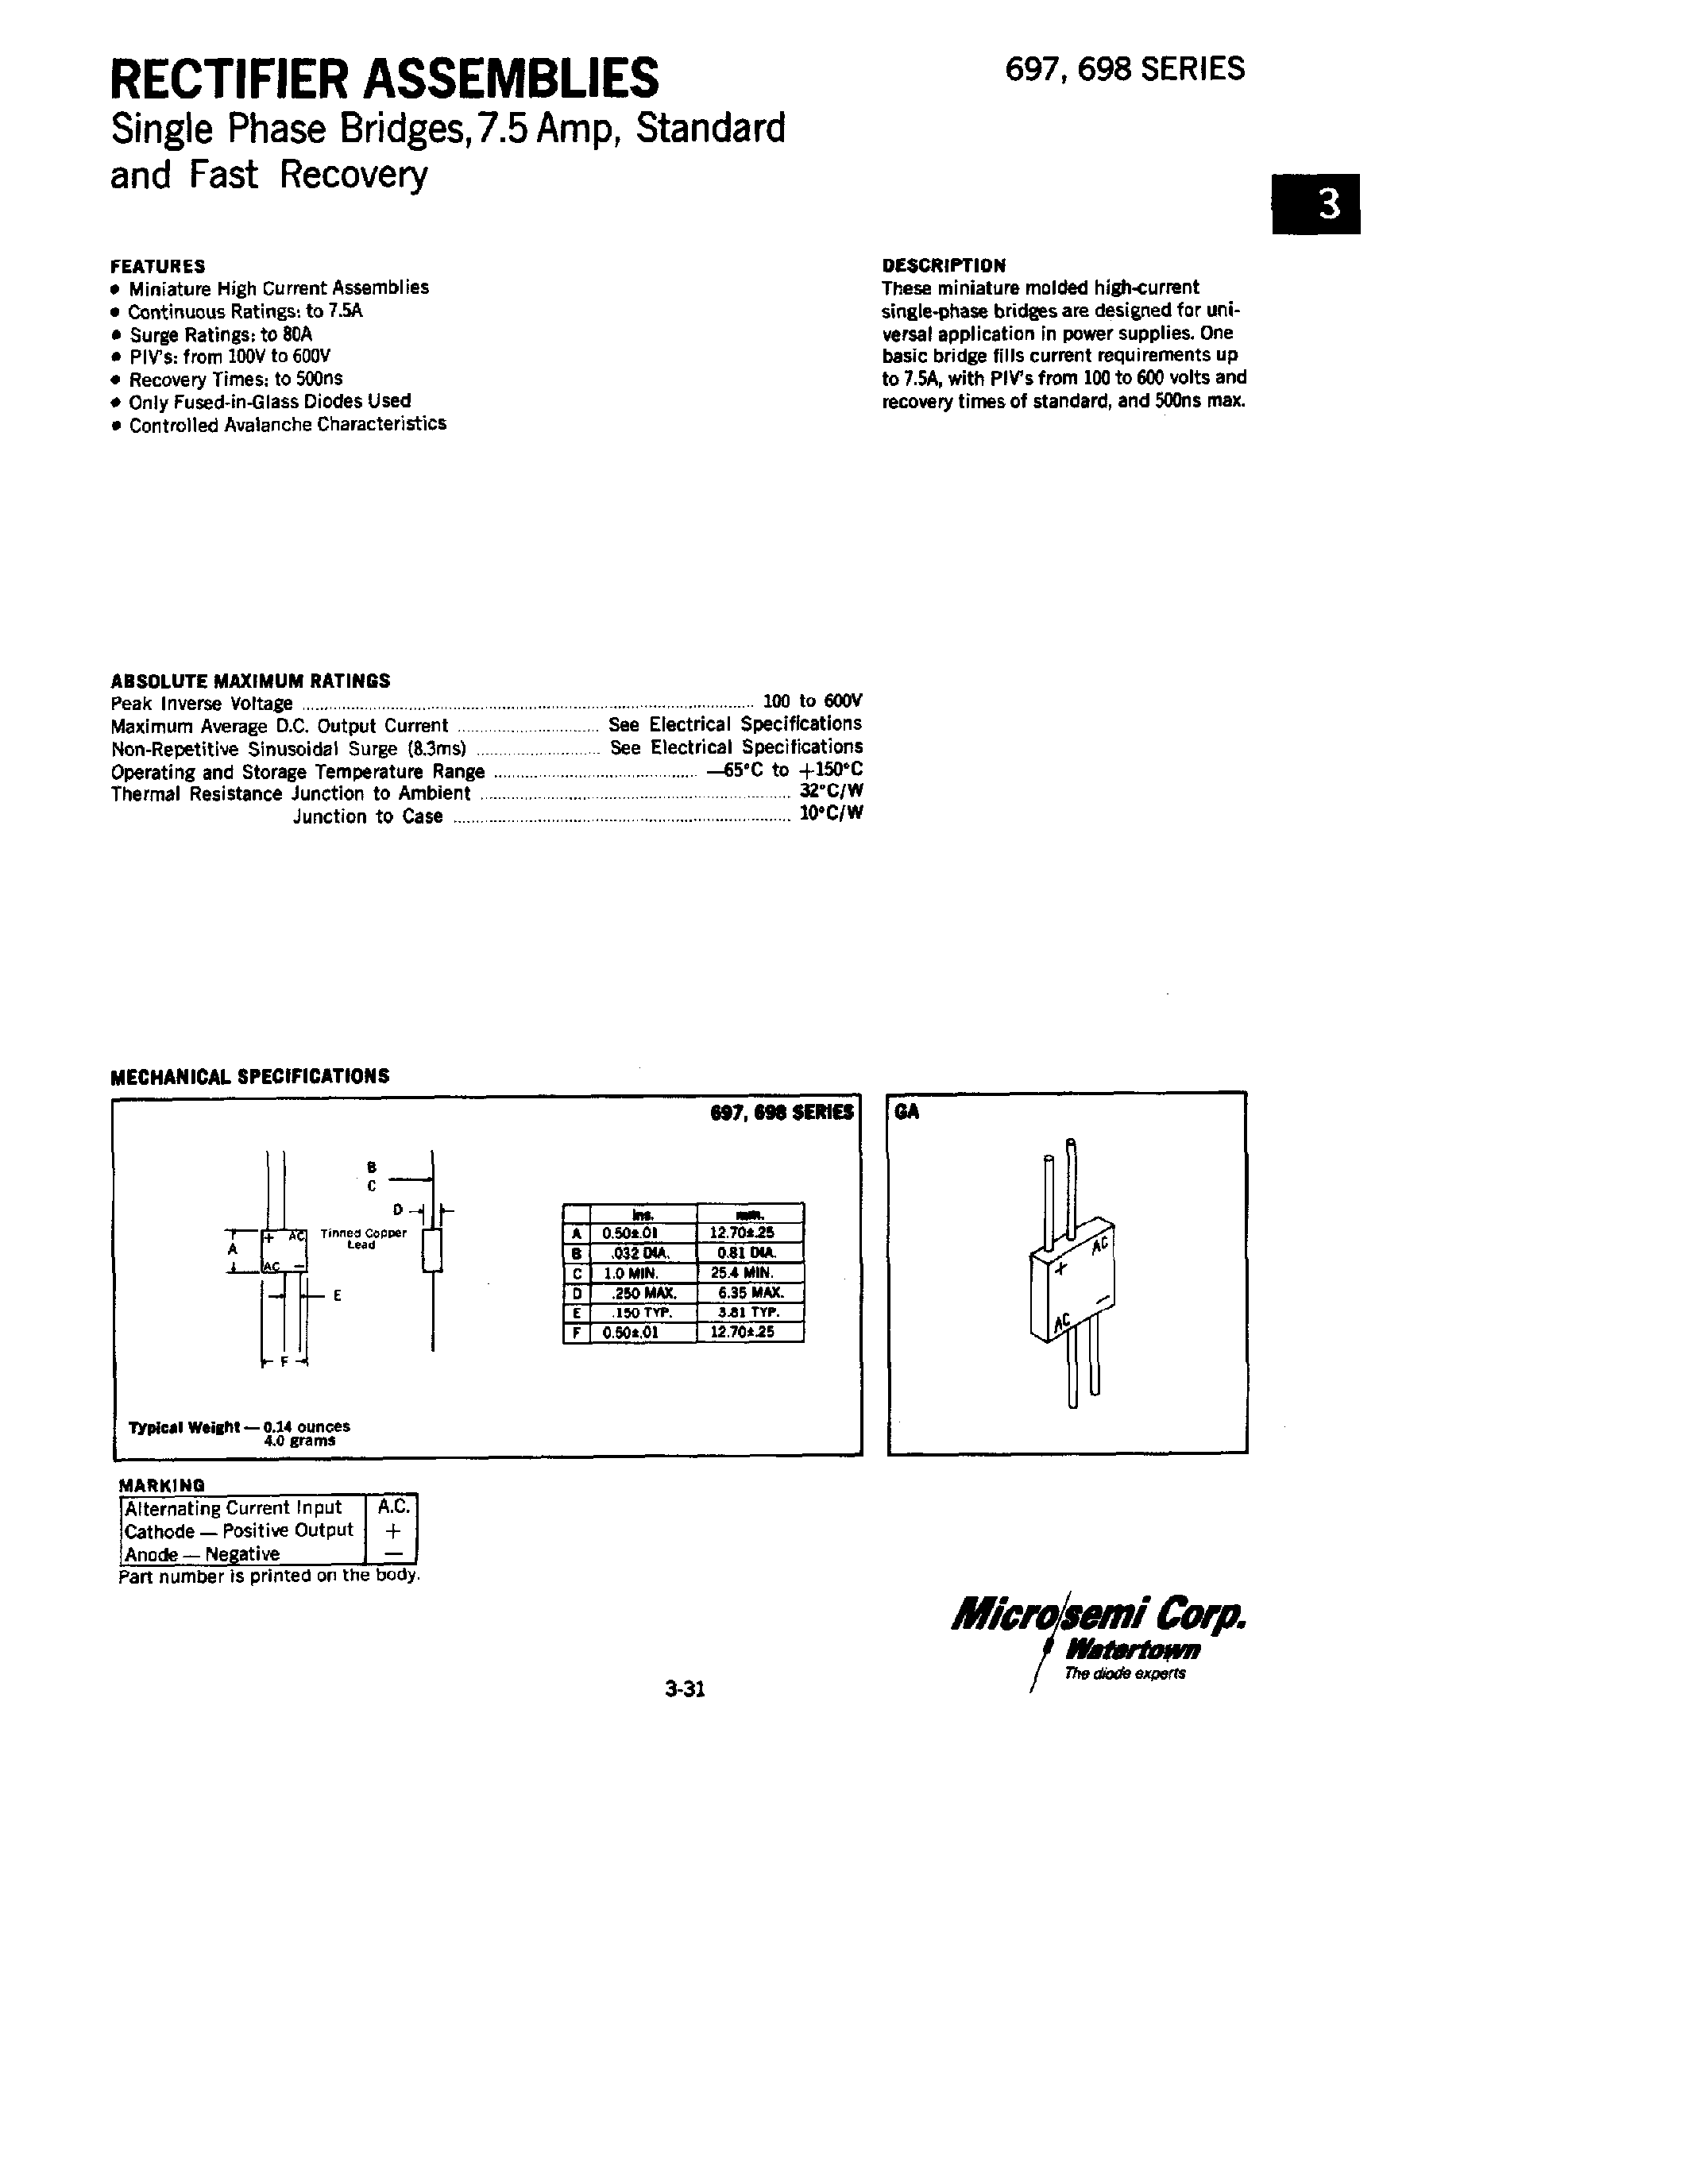 Datasheet 698-6 - RECTIFIERS ASSEMBLIES SINGLE PHASE BRIDGES/ 7.5 AMP/ STANDARD AND FAST RECOVERY page 1